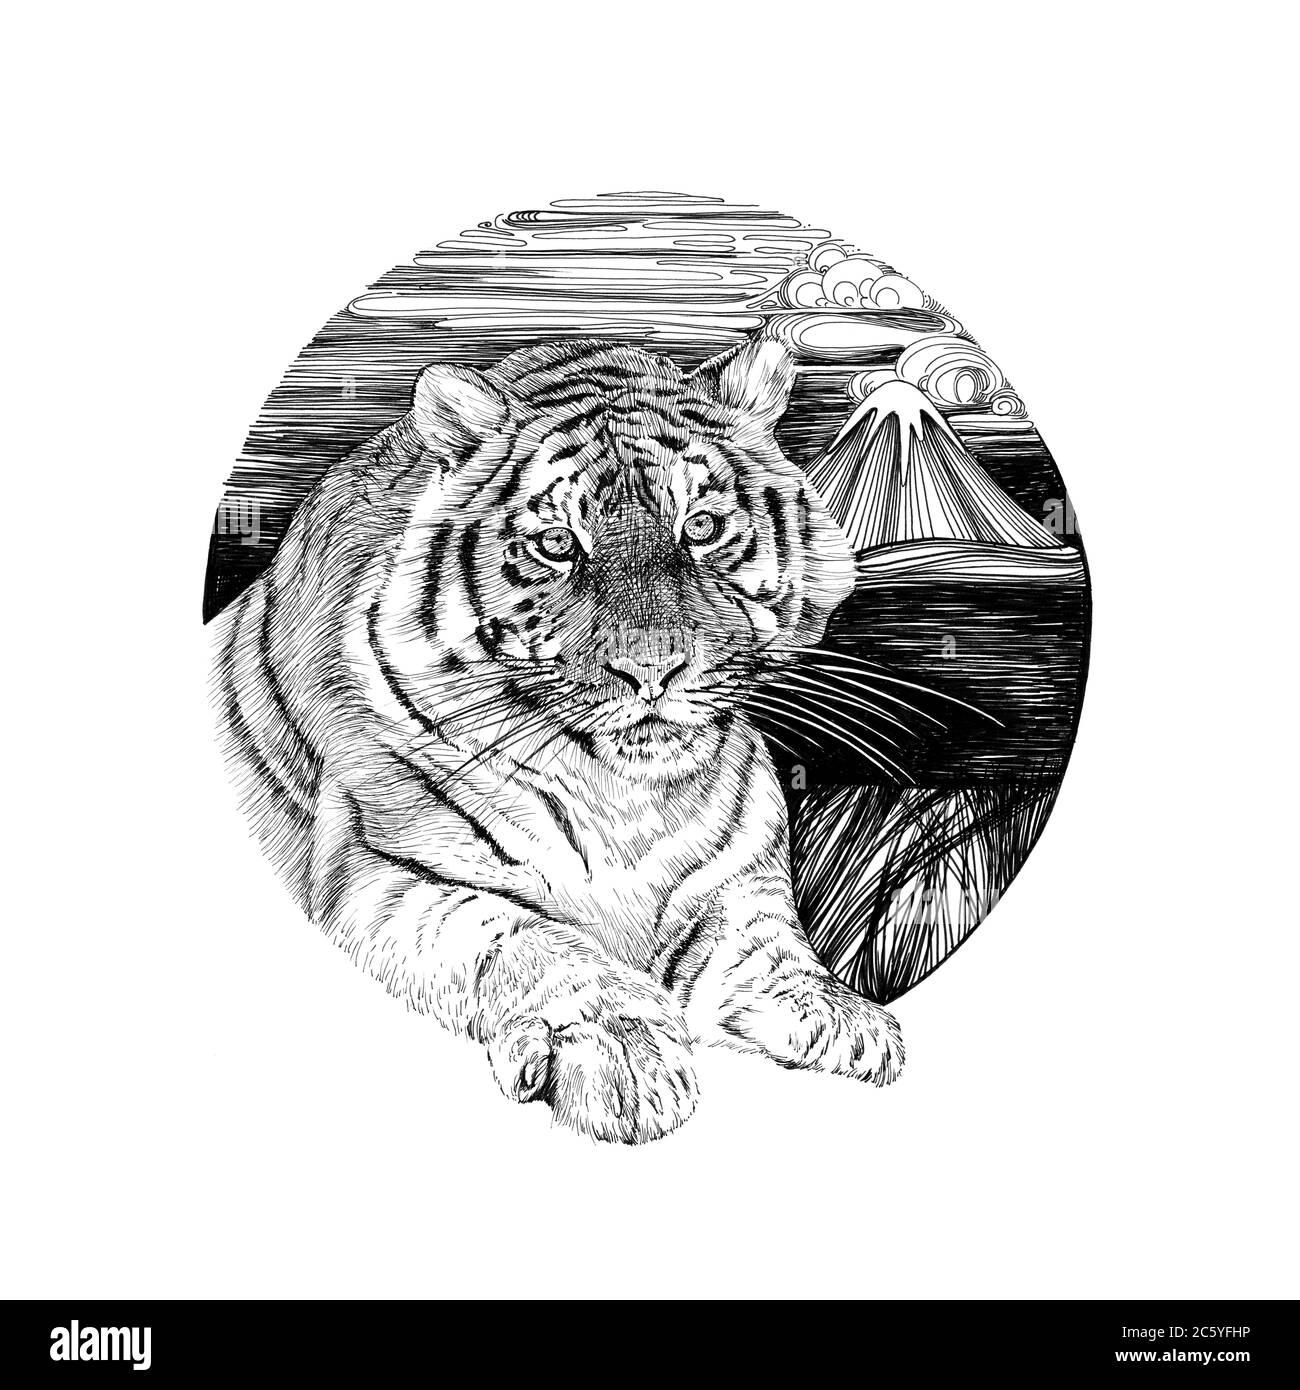 2500 Black And White Tiger Illustrations RoyaltyFree Vector Graphics   Clip Art  iStock  Black and white lion Black and white animals Siberian  tiger